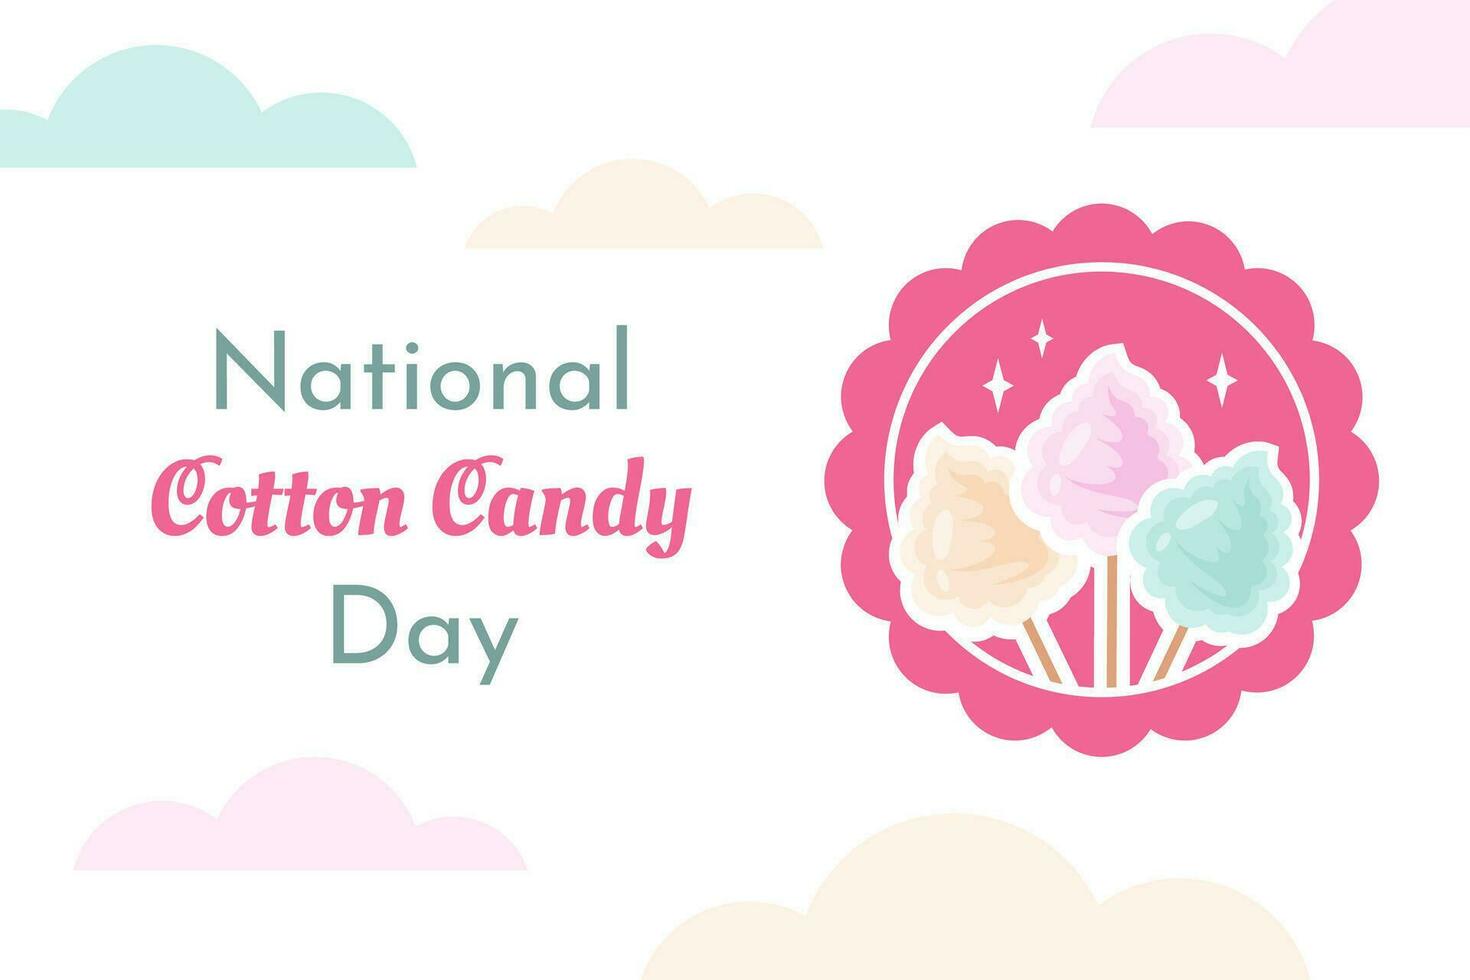 Cotton candy day. Festive banner. Cartoon color Cotton candies in pink frame and vintage text. Colorful puffy sweet dessert. Delicious yummy food for children. Vector illustration